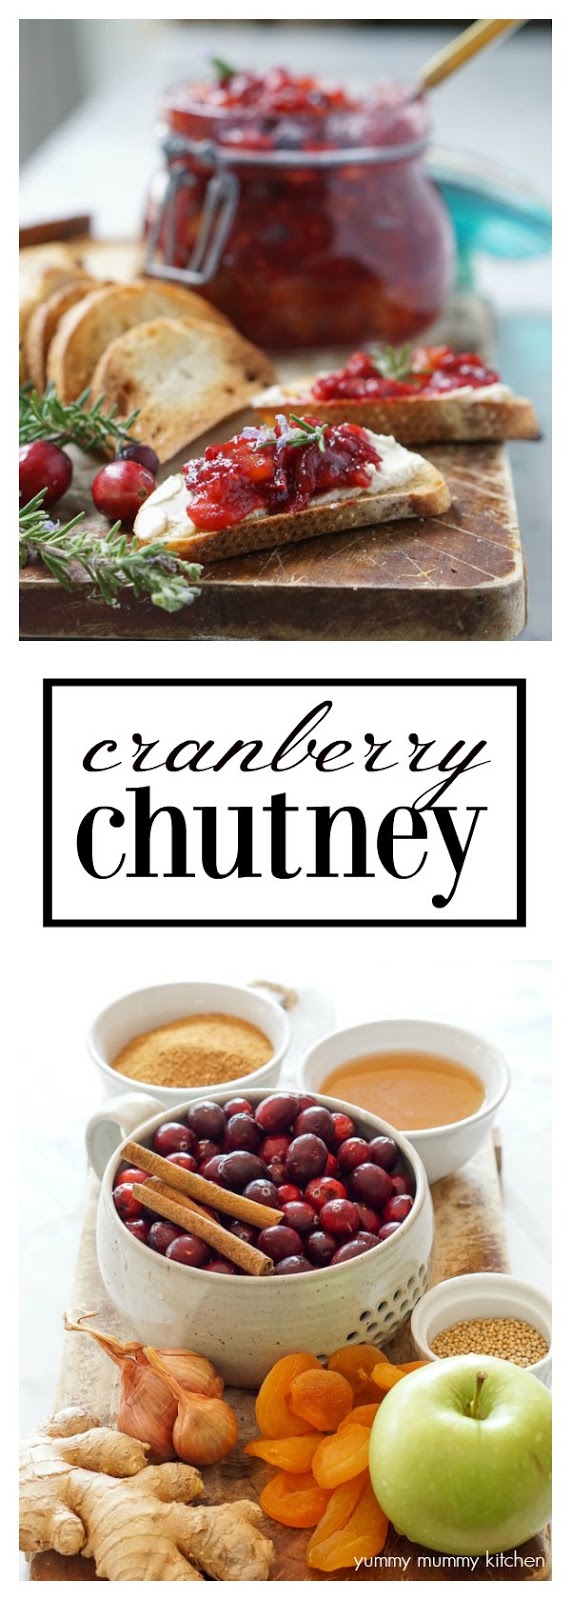 This beautiful cranberry chutney recipe is a delicious alternative to cranberry sauce. It's perfect on everything from crostini to cheese boards to Buddha bowls! Cranberry chutney also makes a great DIY gift!